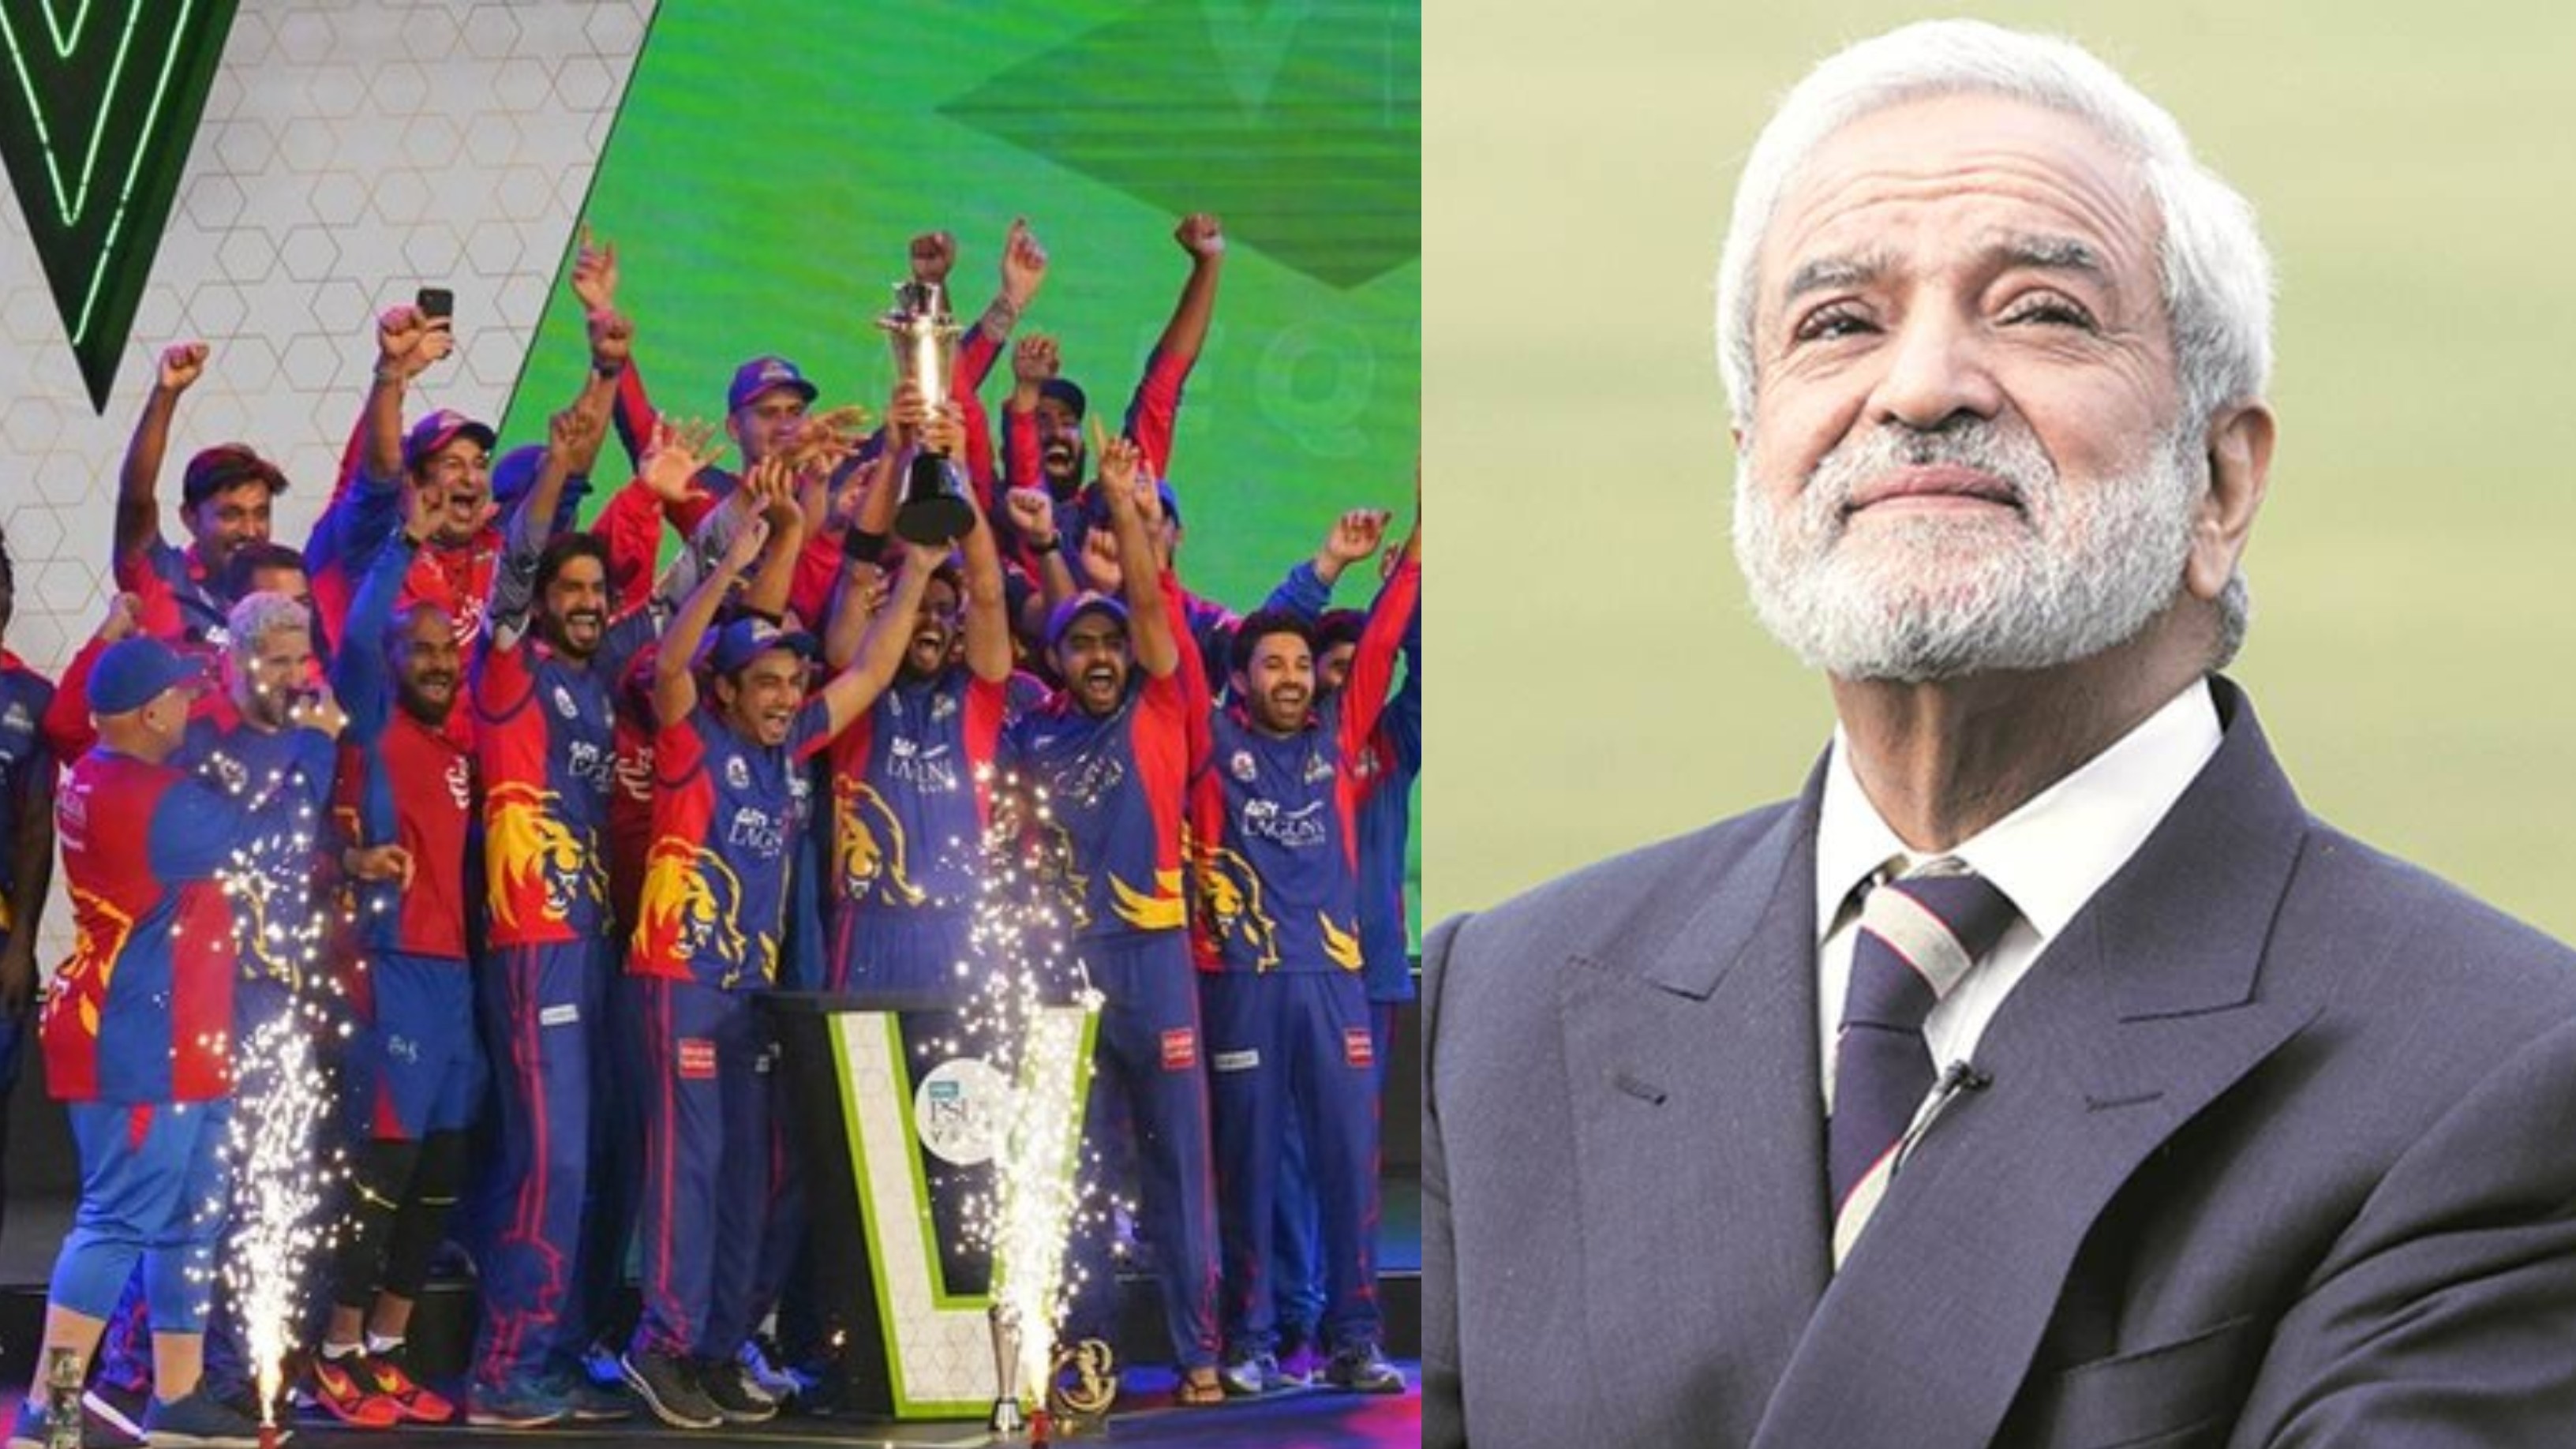 PSL 2020: PCB chief Ehsan Mani elated to have fulfilled commitment of hosting successful PSL 5 in Pakistan